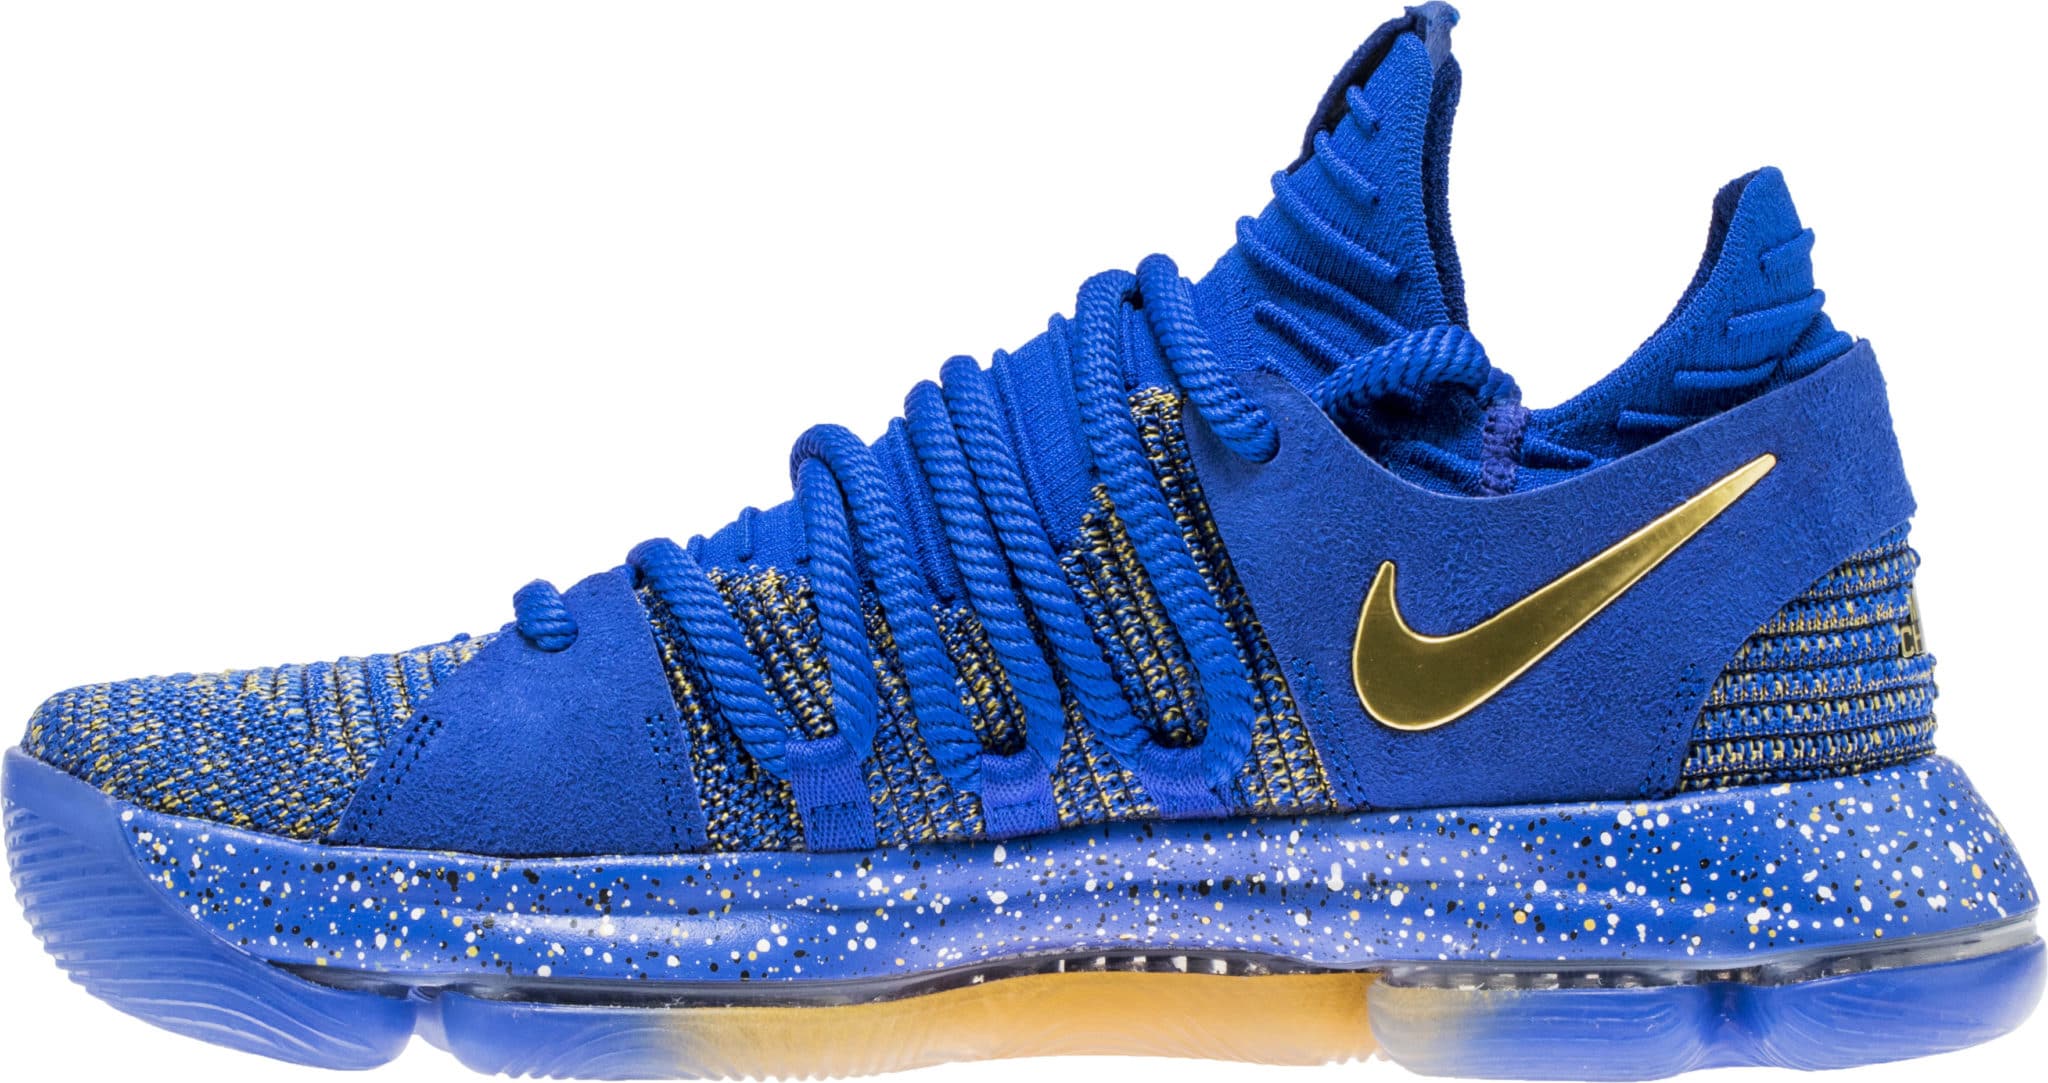 kd 10 weartesters Kevin Durant shoes on 